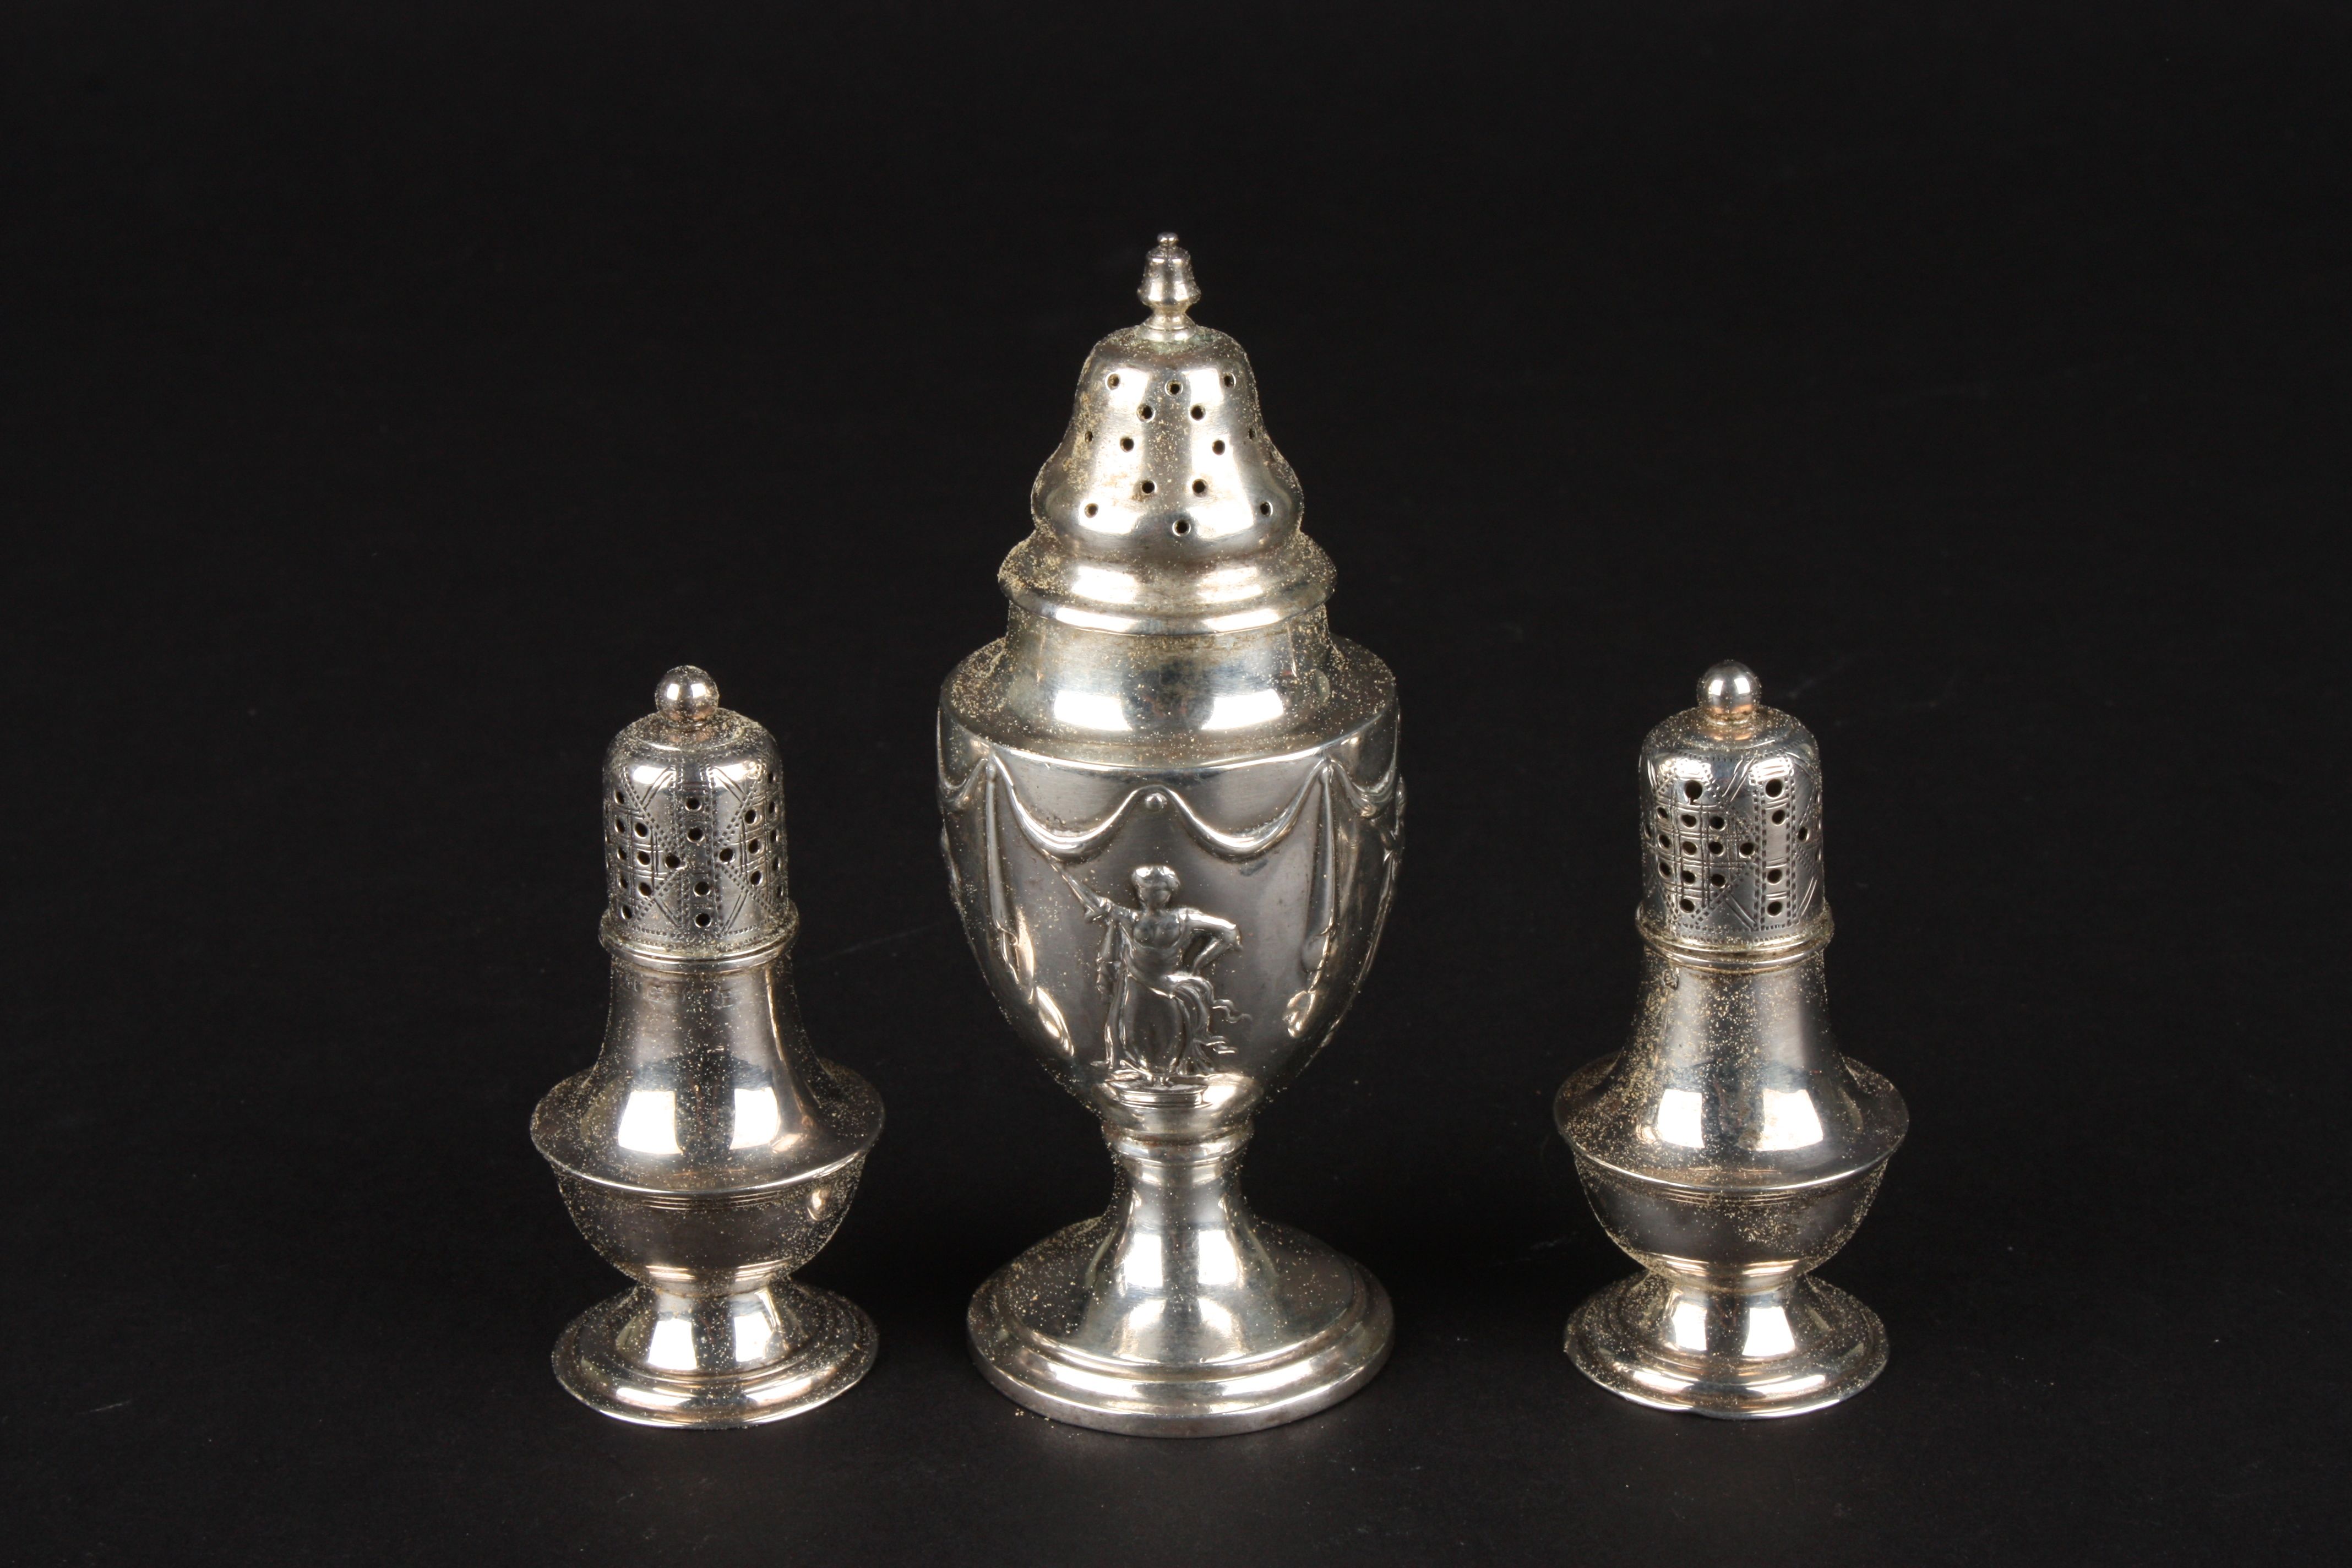 A baluster shaped silver pepperette with repoussé Roman figure decoration, together with a smaller